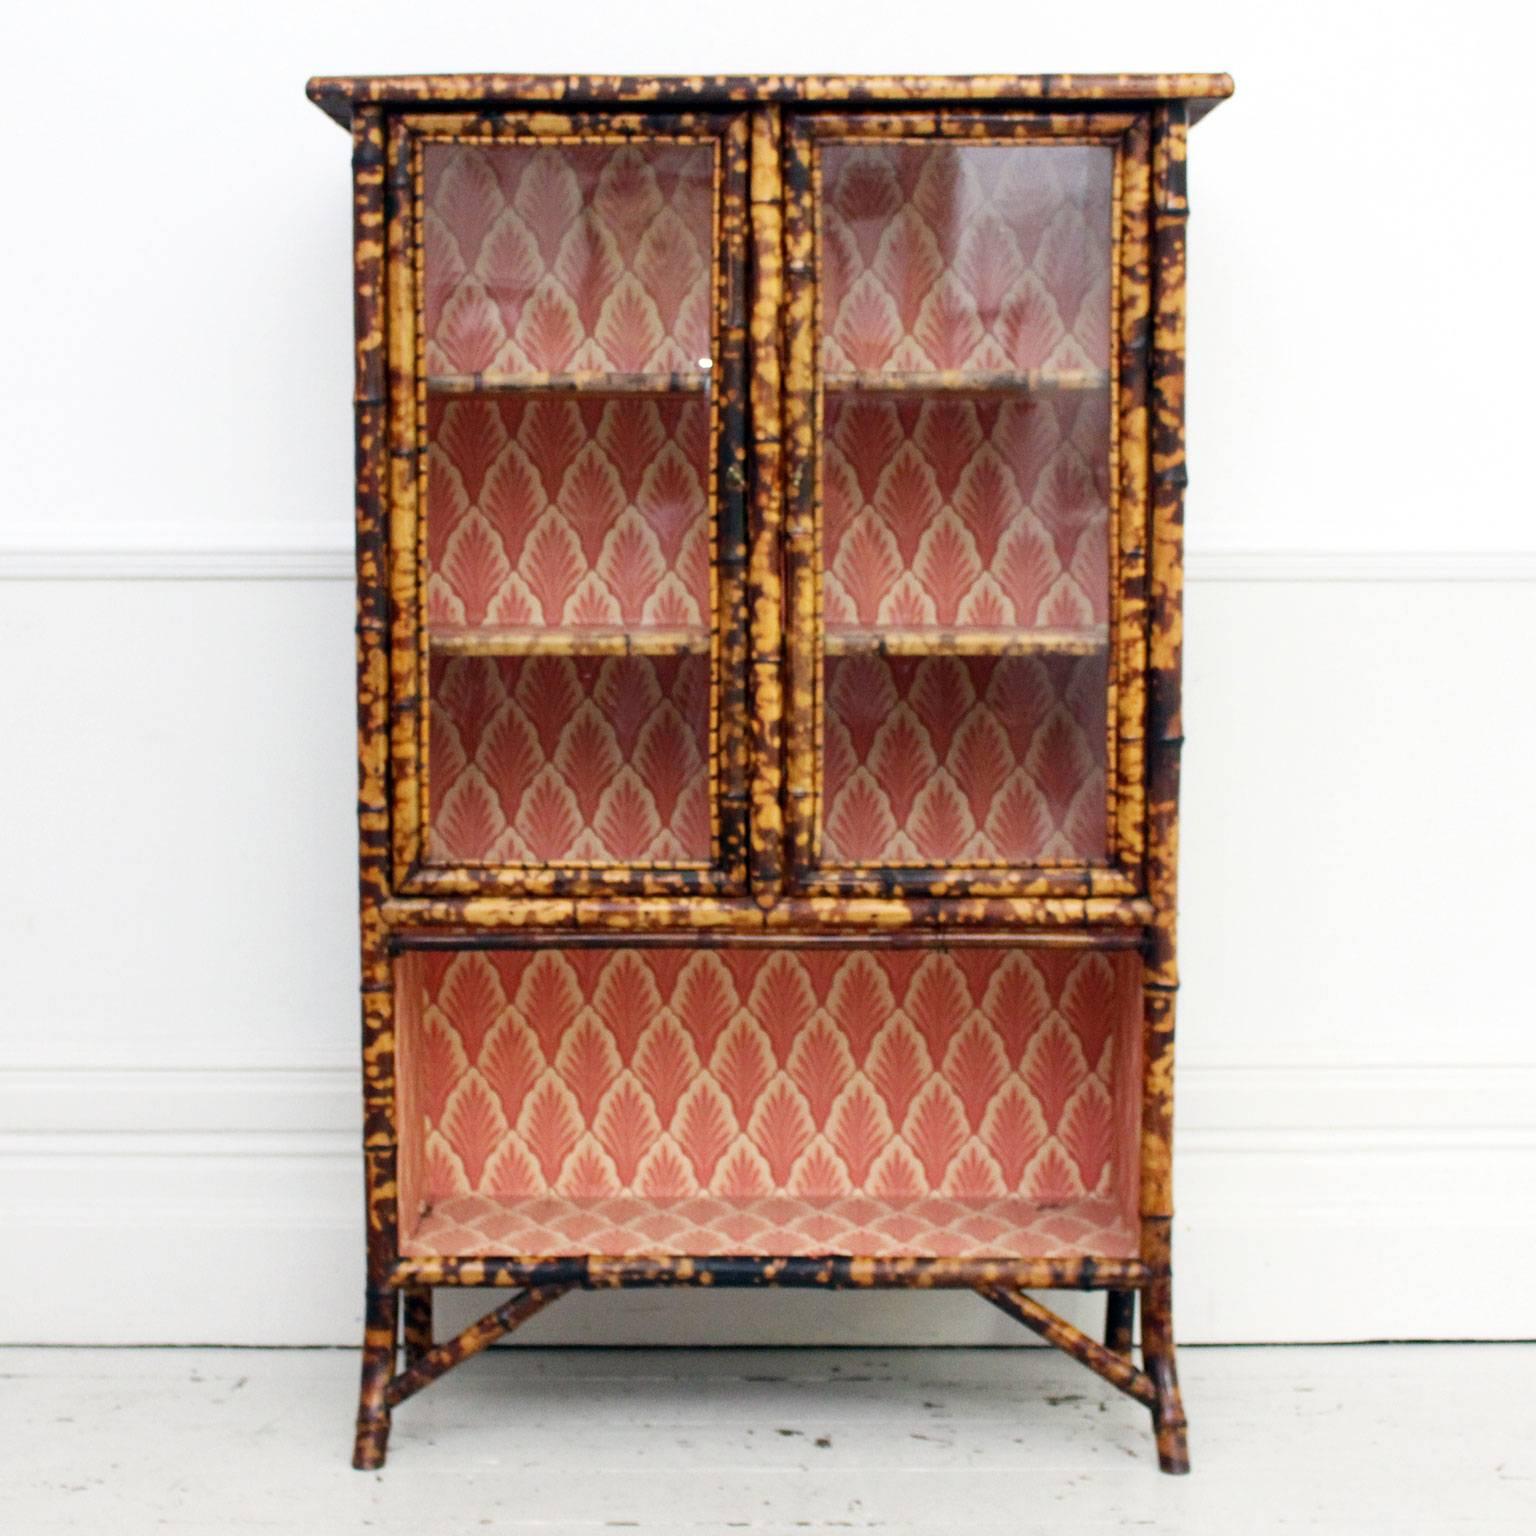 We love all things rattan and bamboo and this is a particularly nice example of a tiger bamboo cabinet dating back to 1900. We love the vintage wallpaper lining the interior, the proportions and the glass front. This would look fabulous in a hall, a